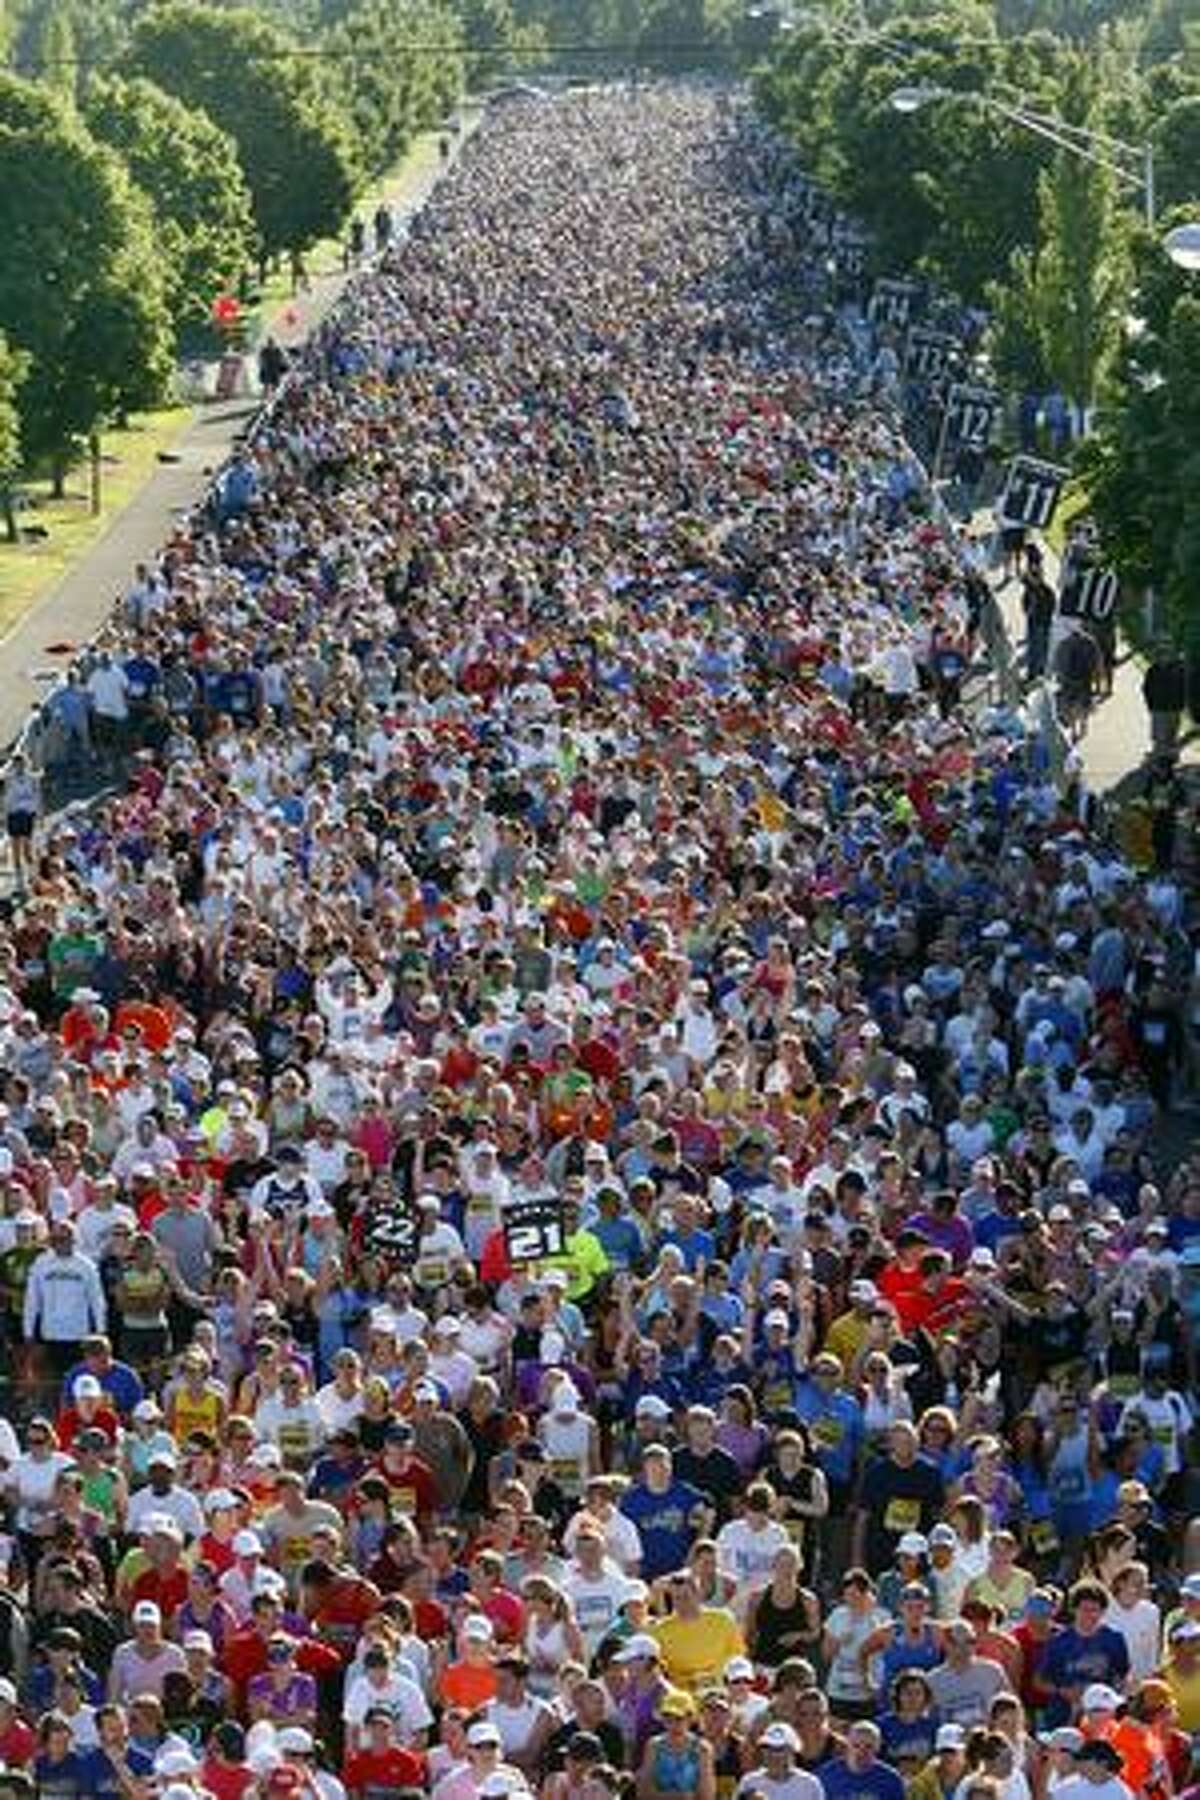 Some of the estimated 25,000 people who signed up for the inaugural Rock 'N' Roll Seattle Marathon gather at the start line in Tukwila on Saturday June 27, 2009.